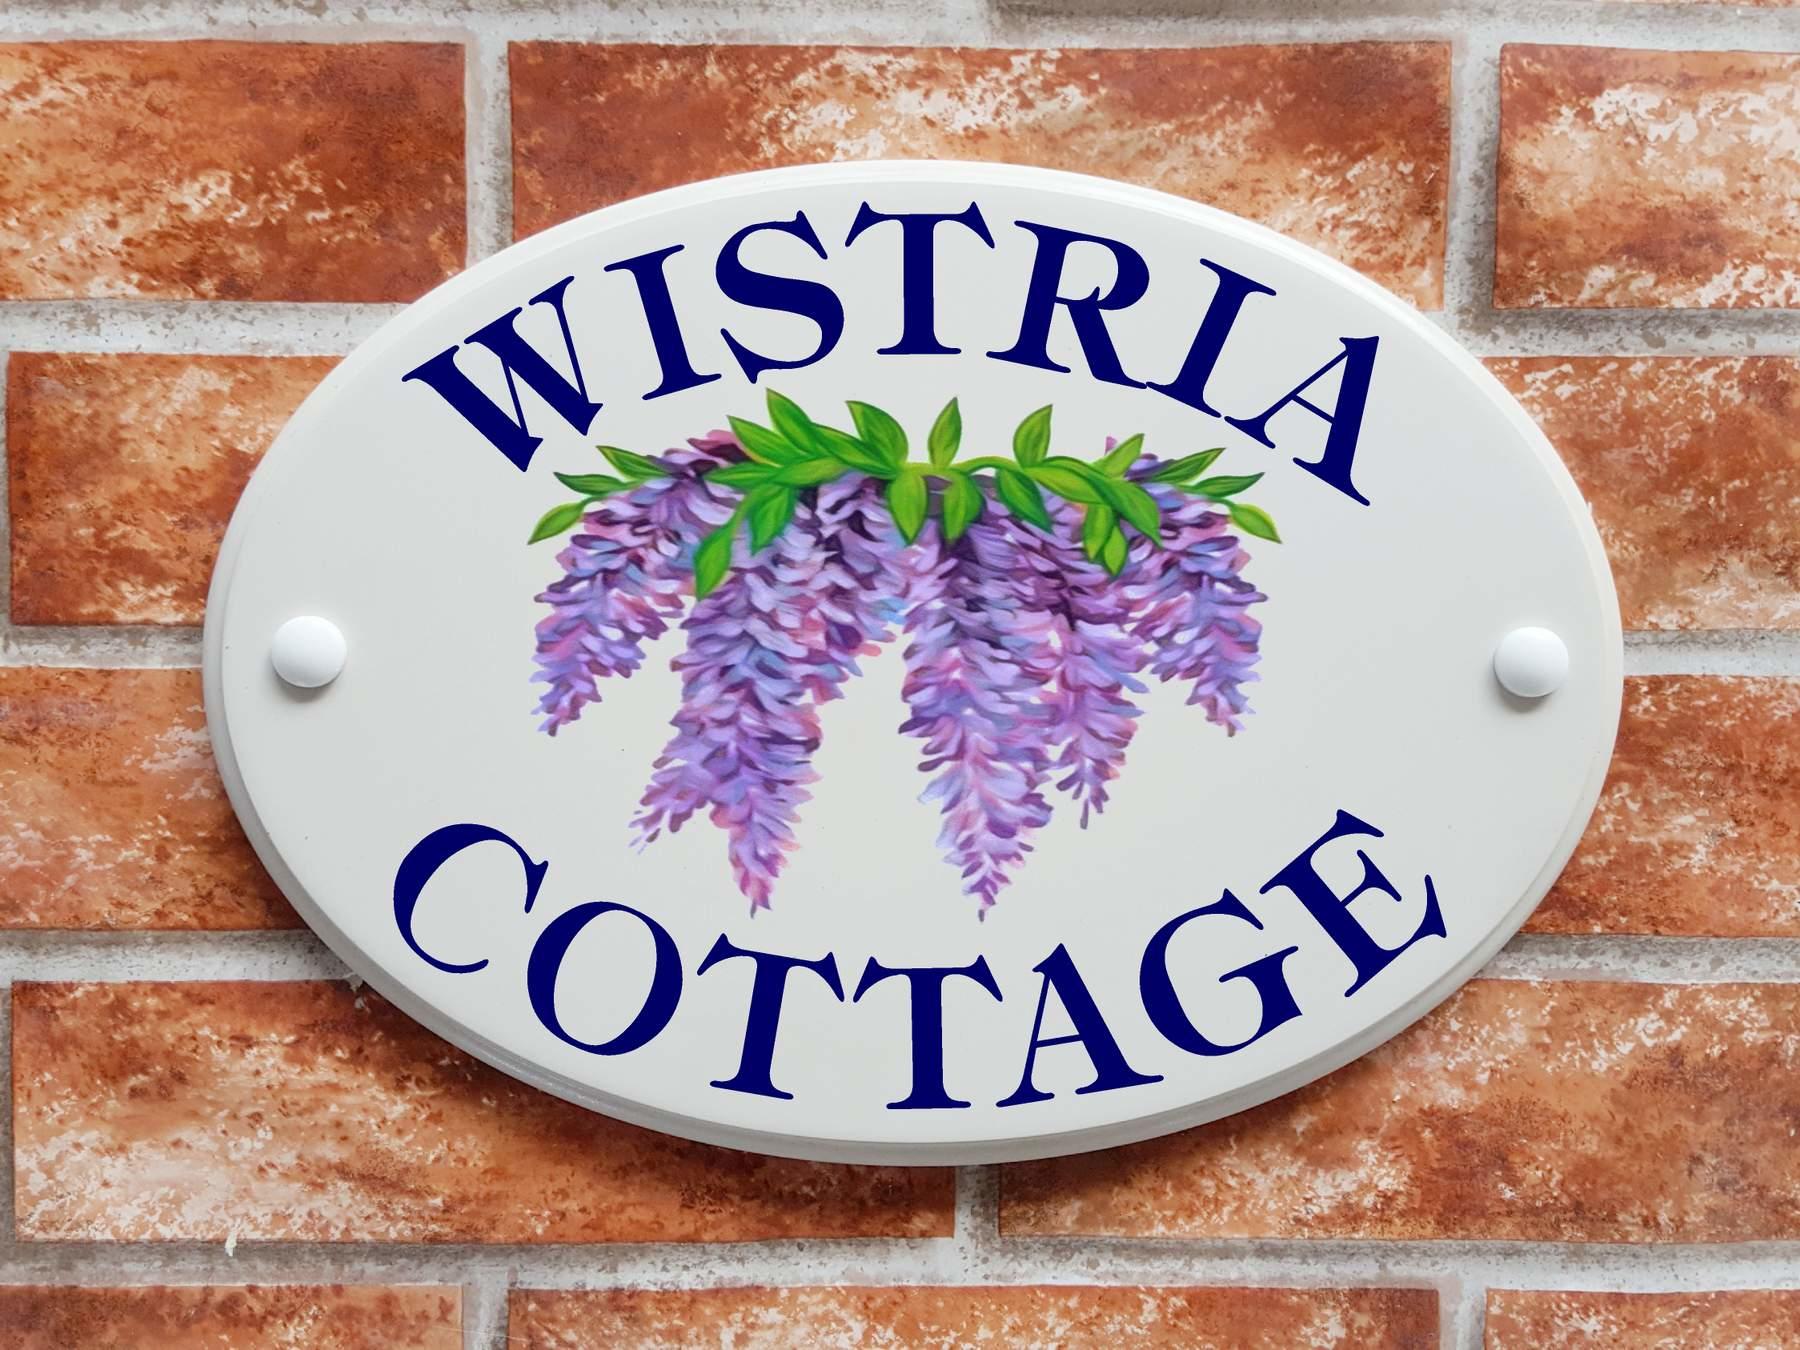 Wisteria Cottage sign (code 087)